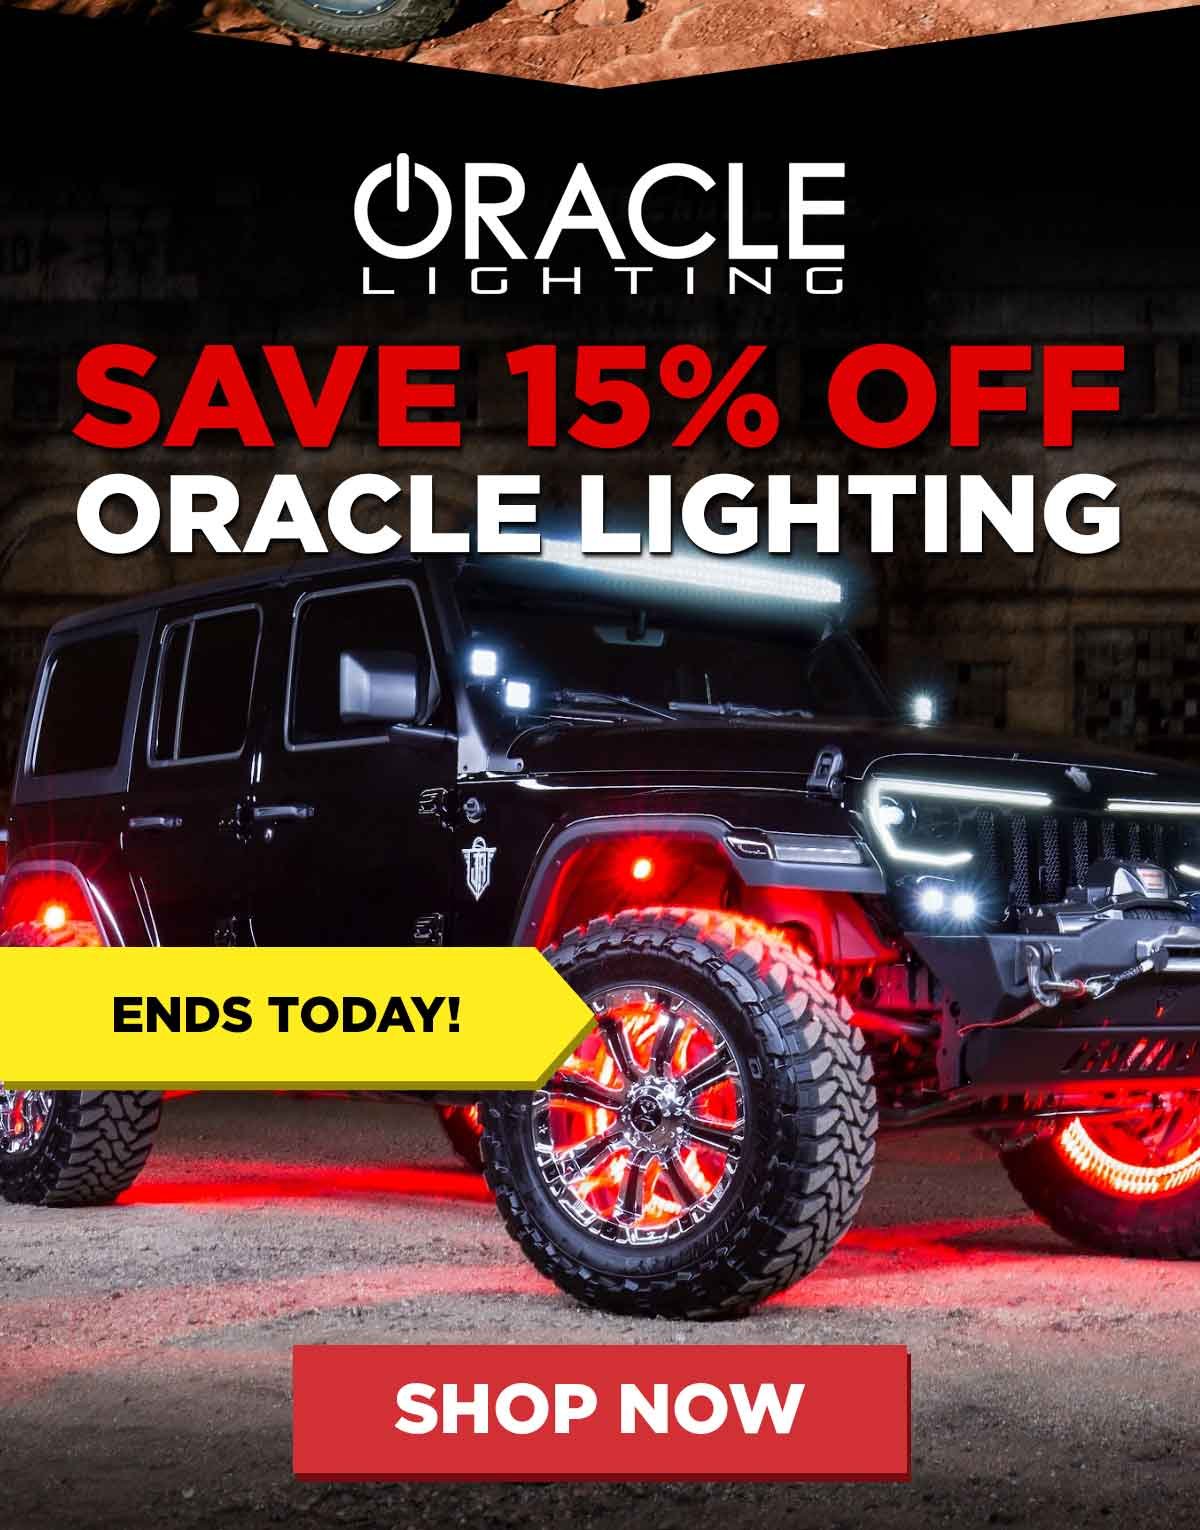 Save 15% Off Oracle Lighting